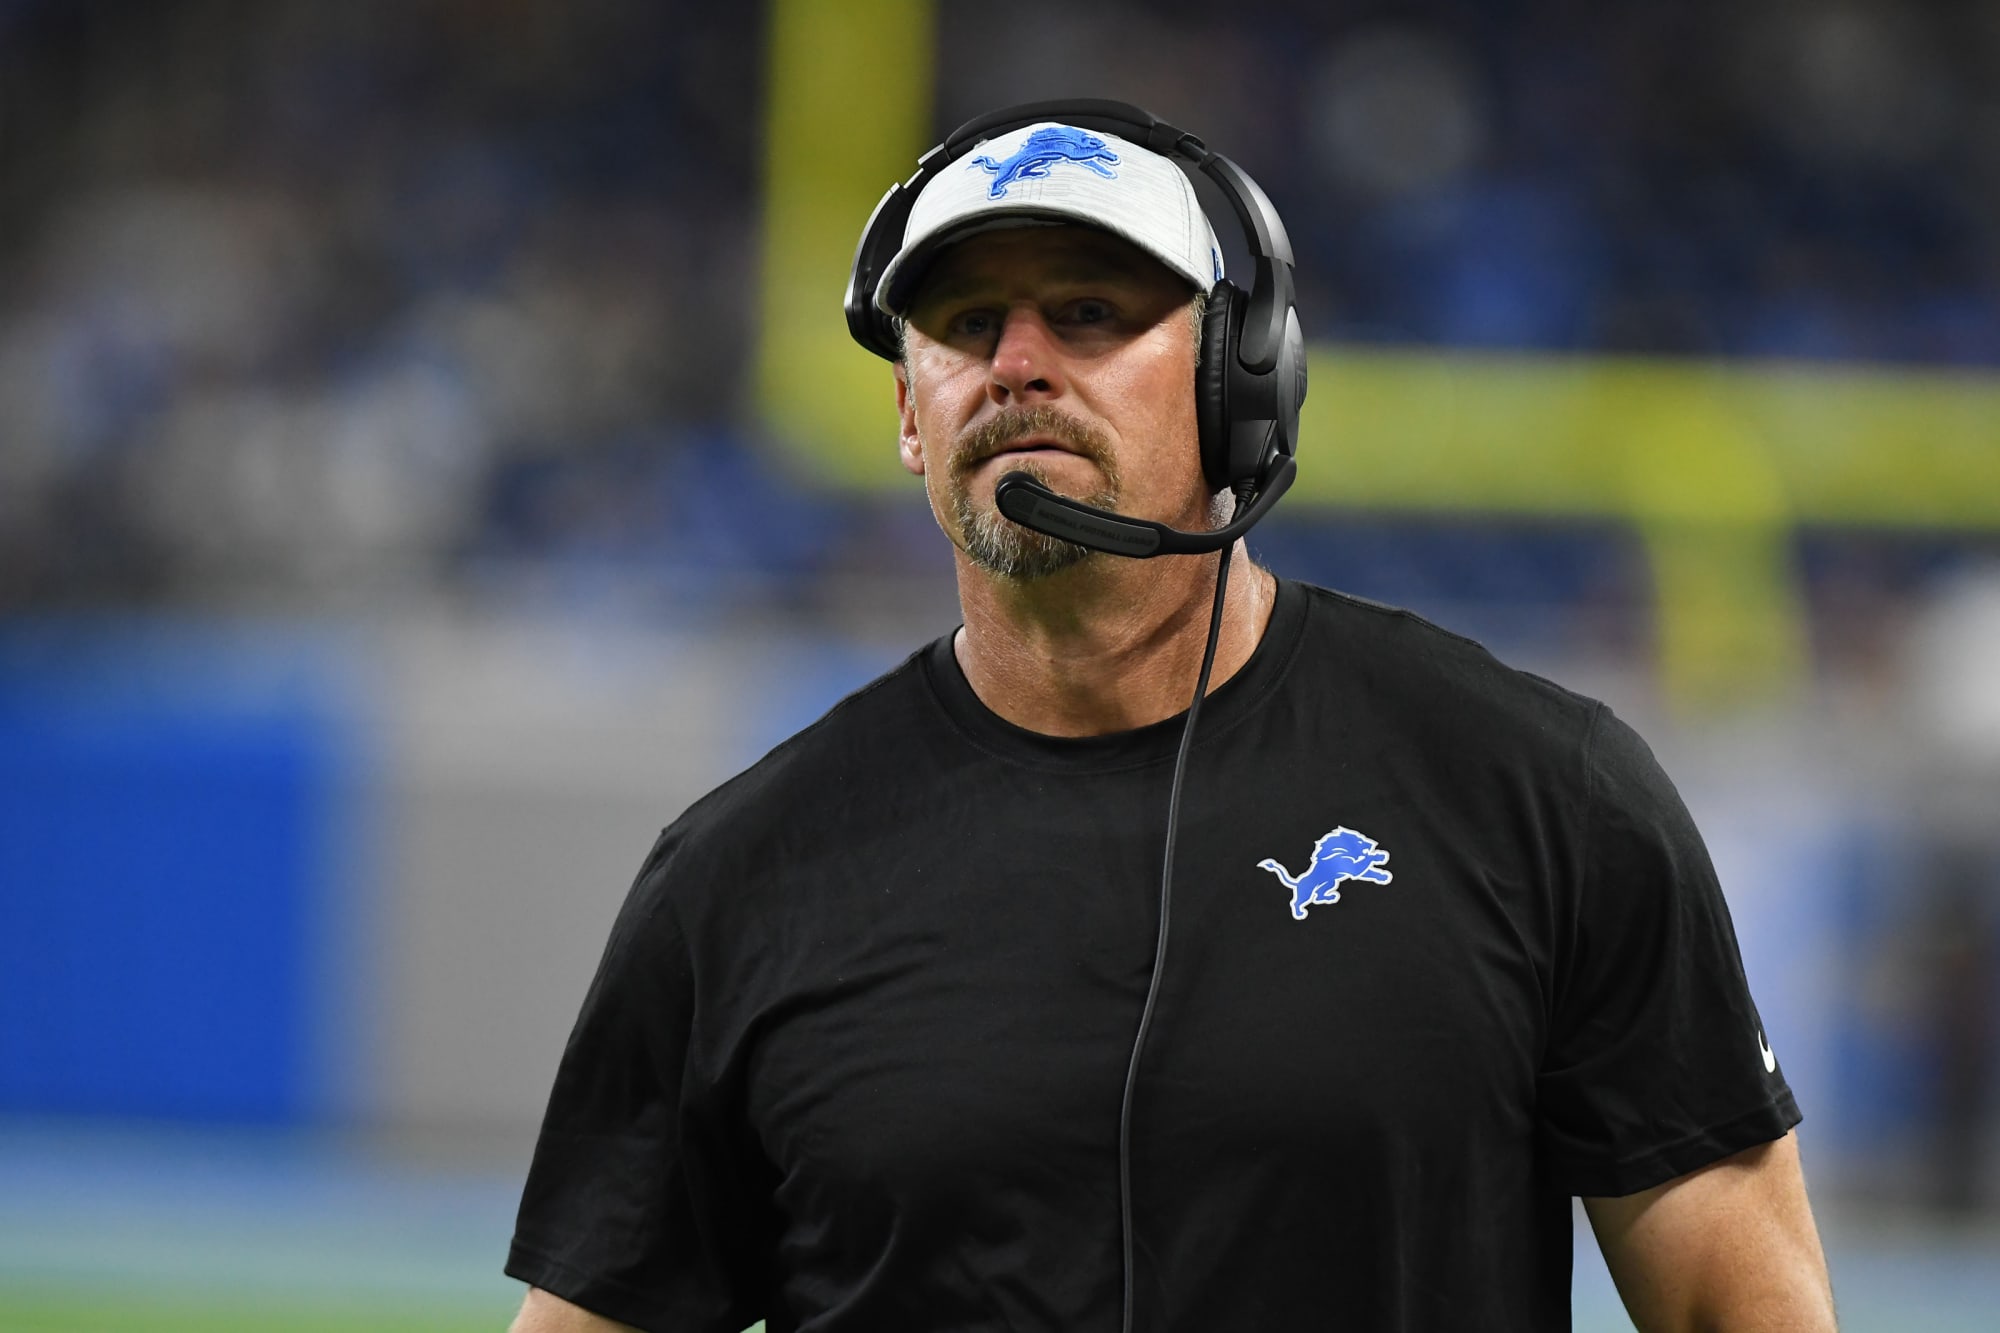 Lions head coach Dan Campbell sees value in being underestimated